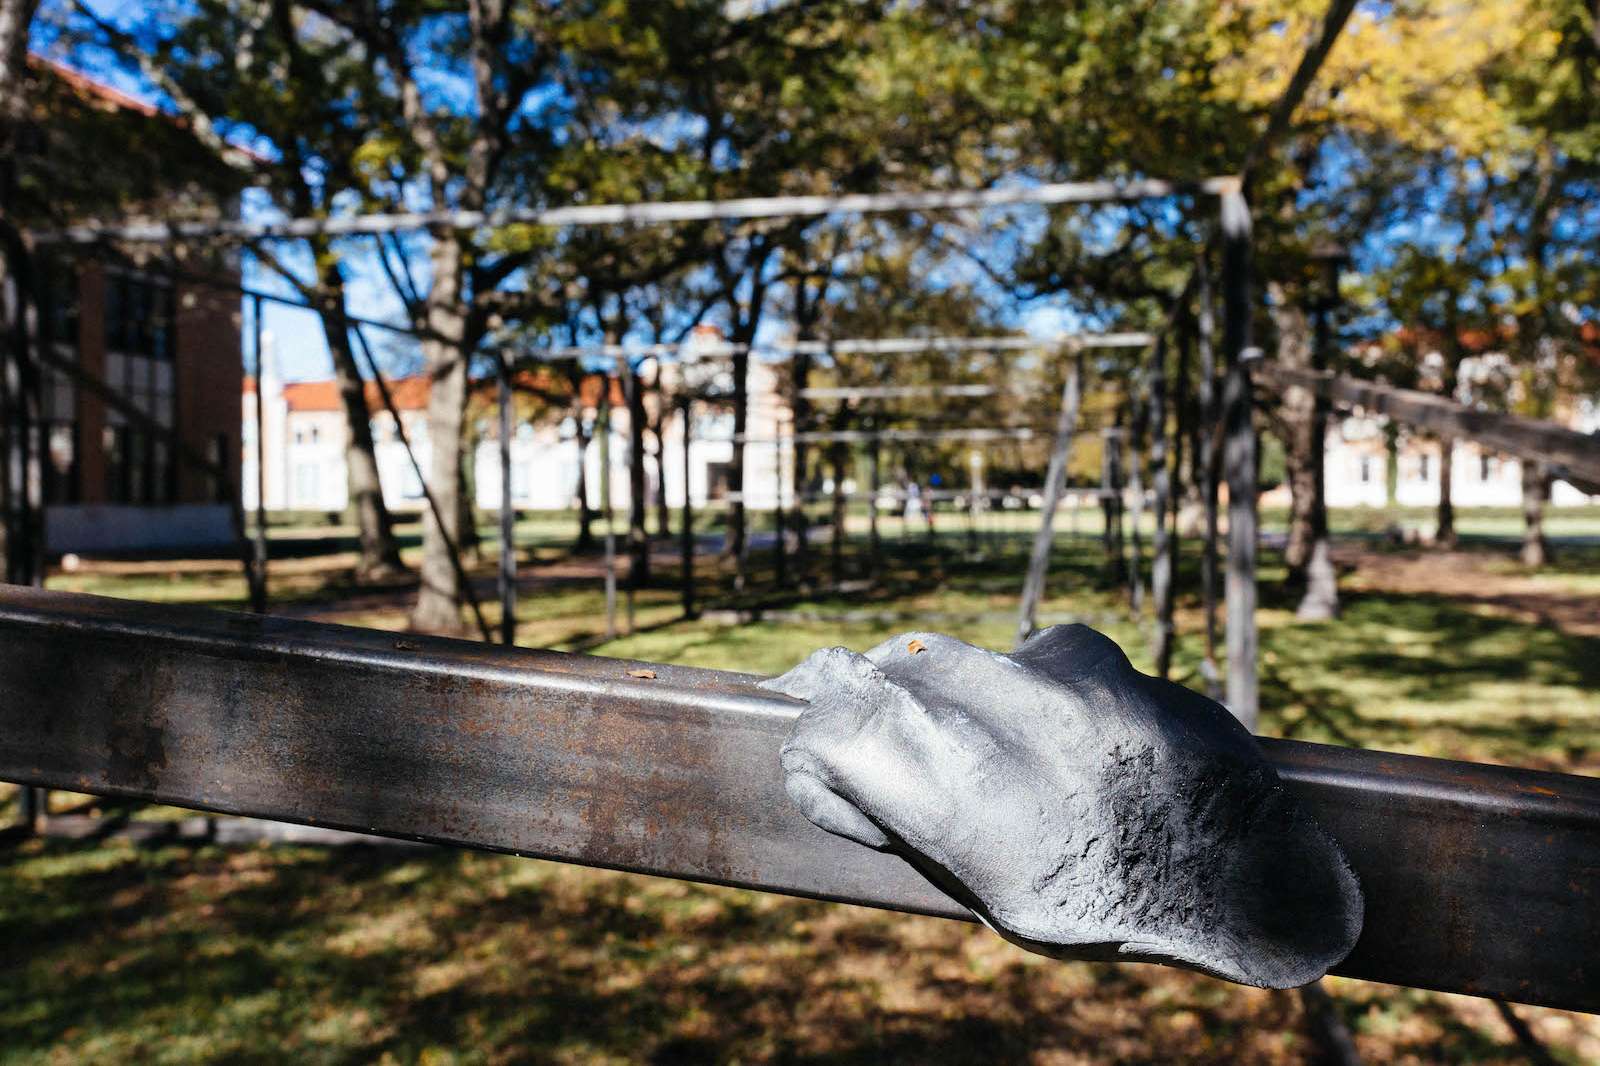 Jarrod Beck, Origin, 135 degrees, 2017, Steel and resin clay. Commissioned by Rice Public Art and made possible through the generous support of Russ Pitman (’58). Photo: Lynn Lane.